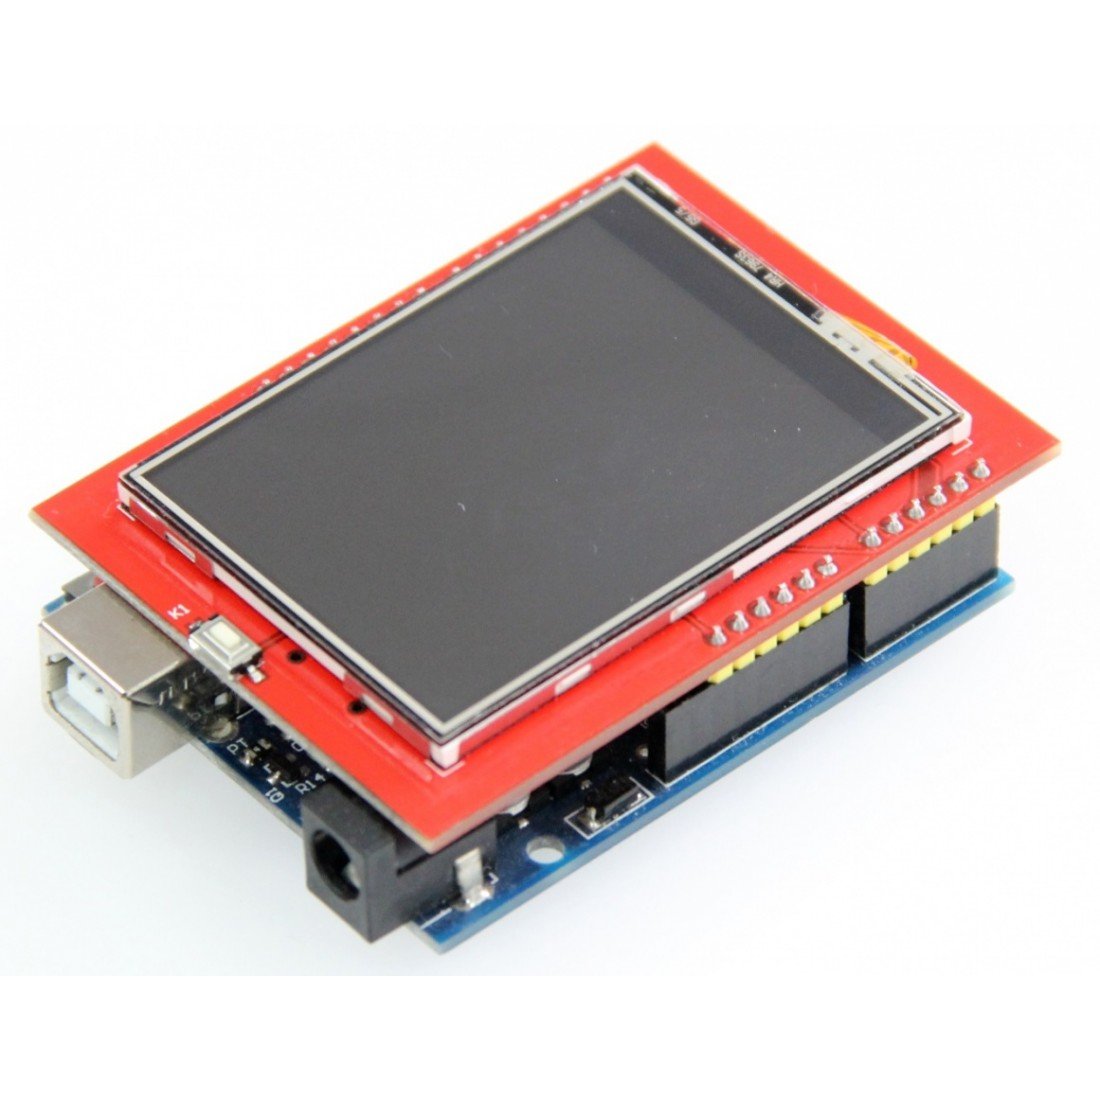 2.4 Inch Touch Screen TFT Display Shield for Arduino UNO Mega Authentic Quality